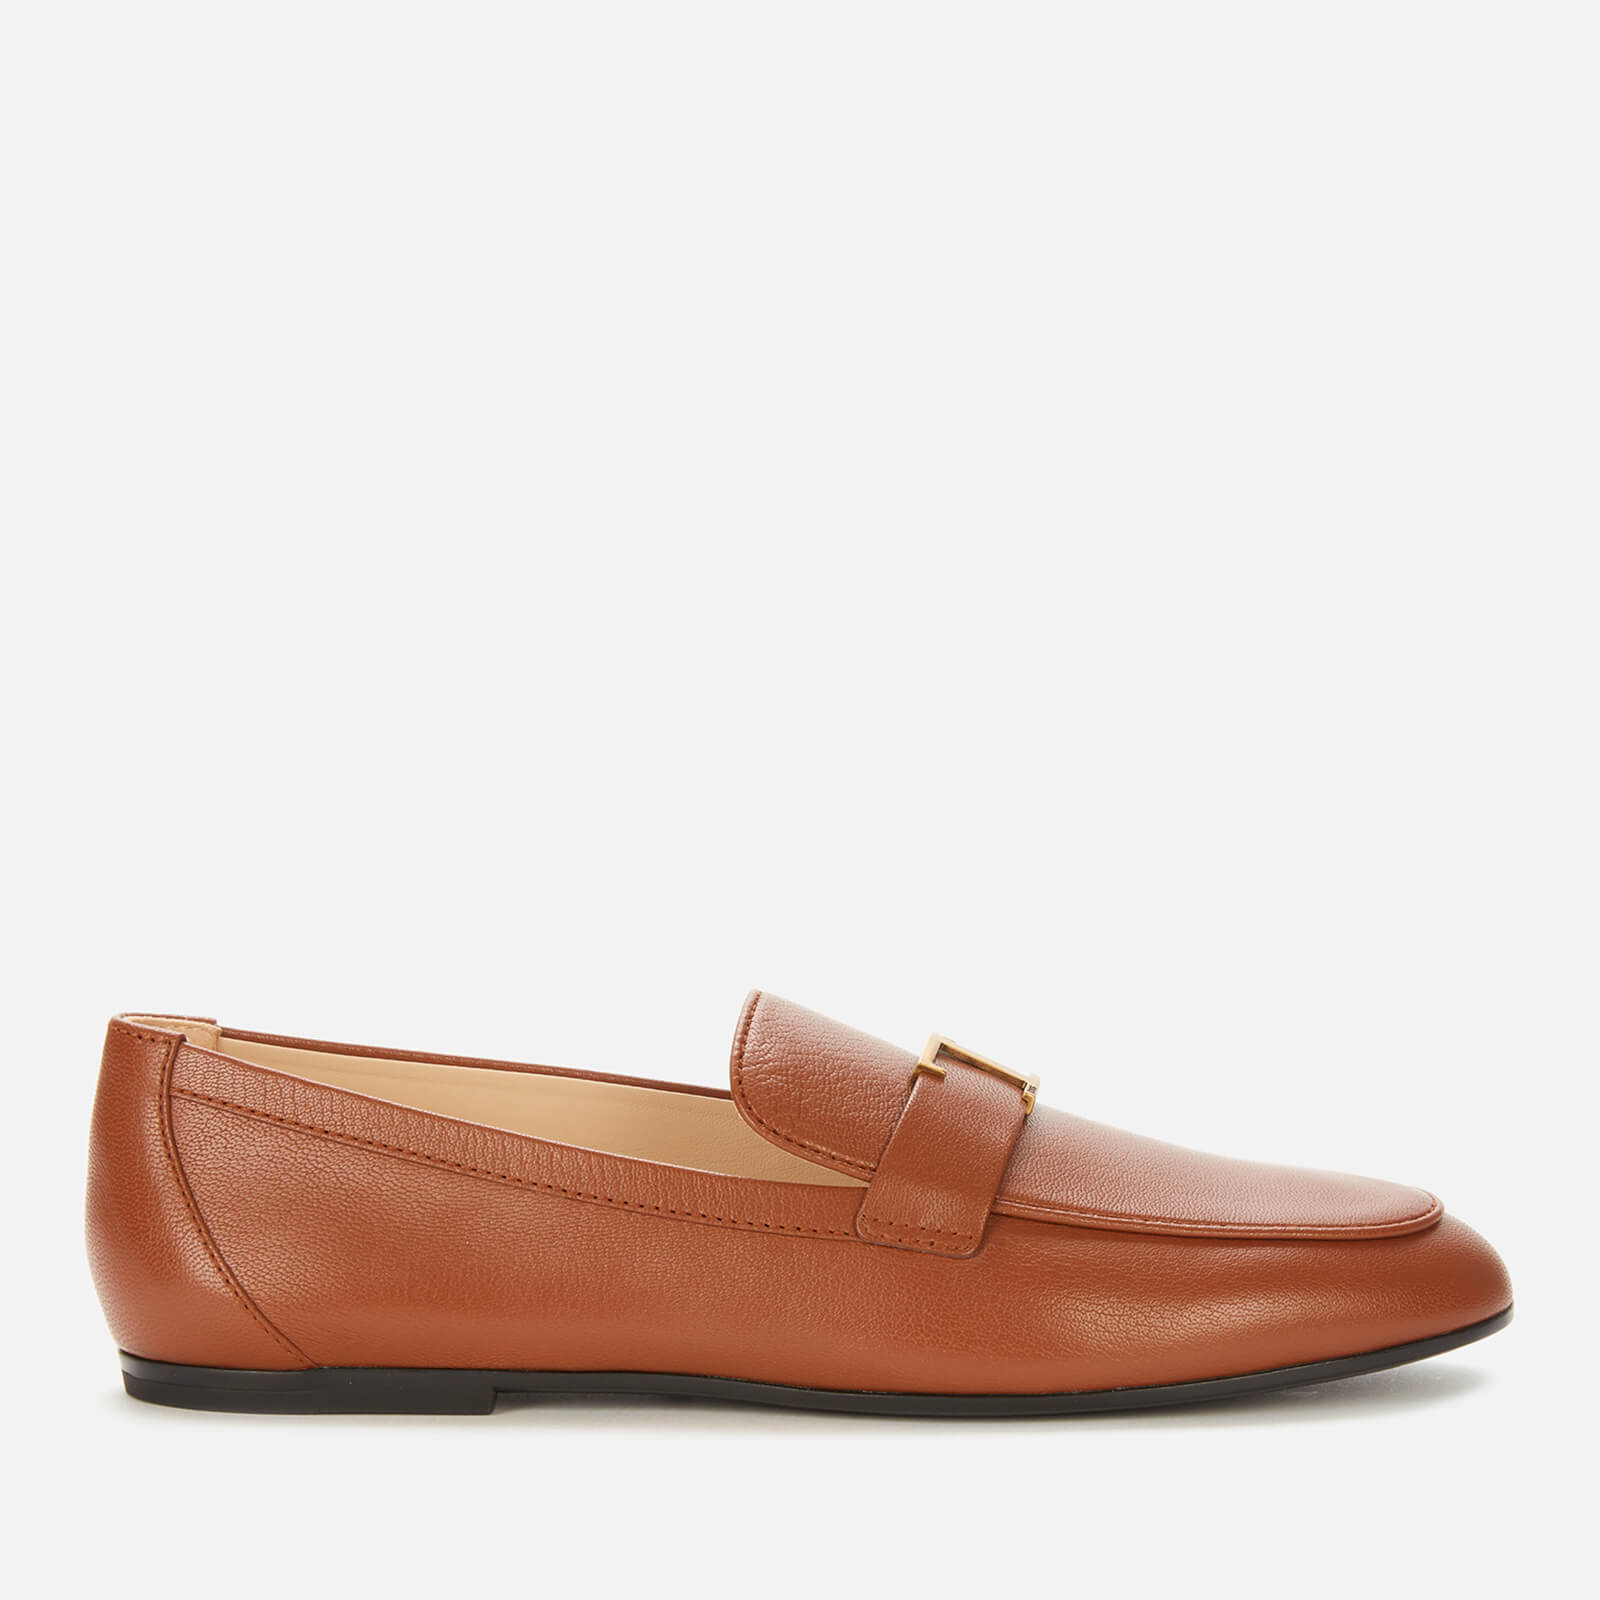 Tod's Women's Gomma Leather Loafers - Tan - UK 4